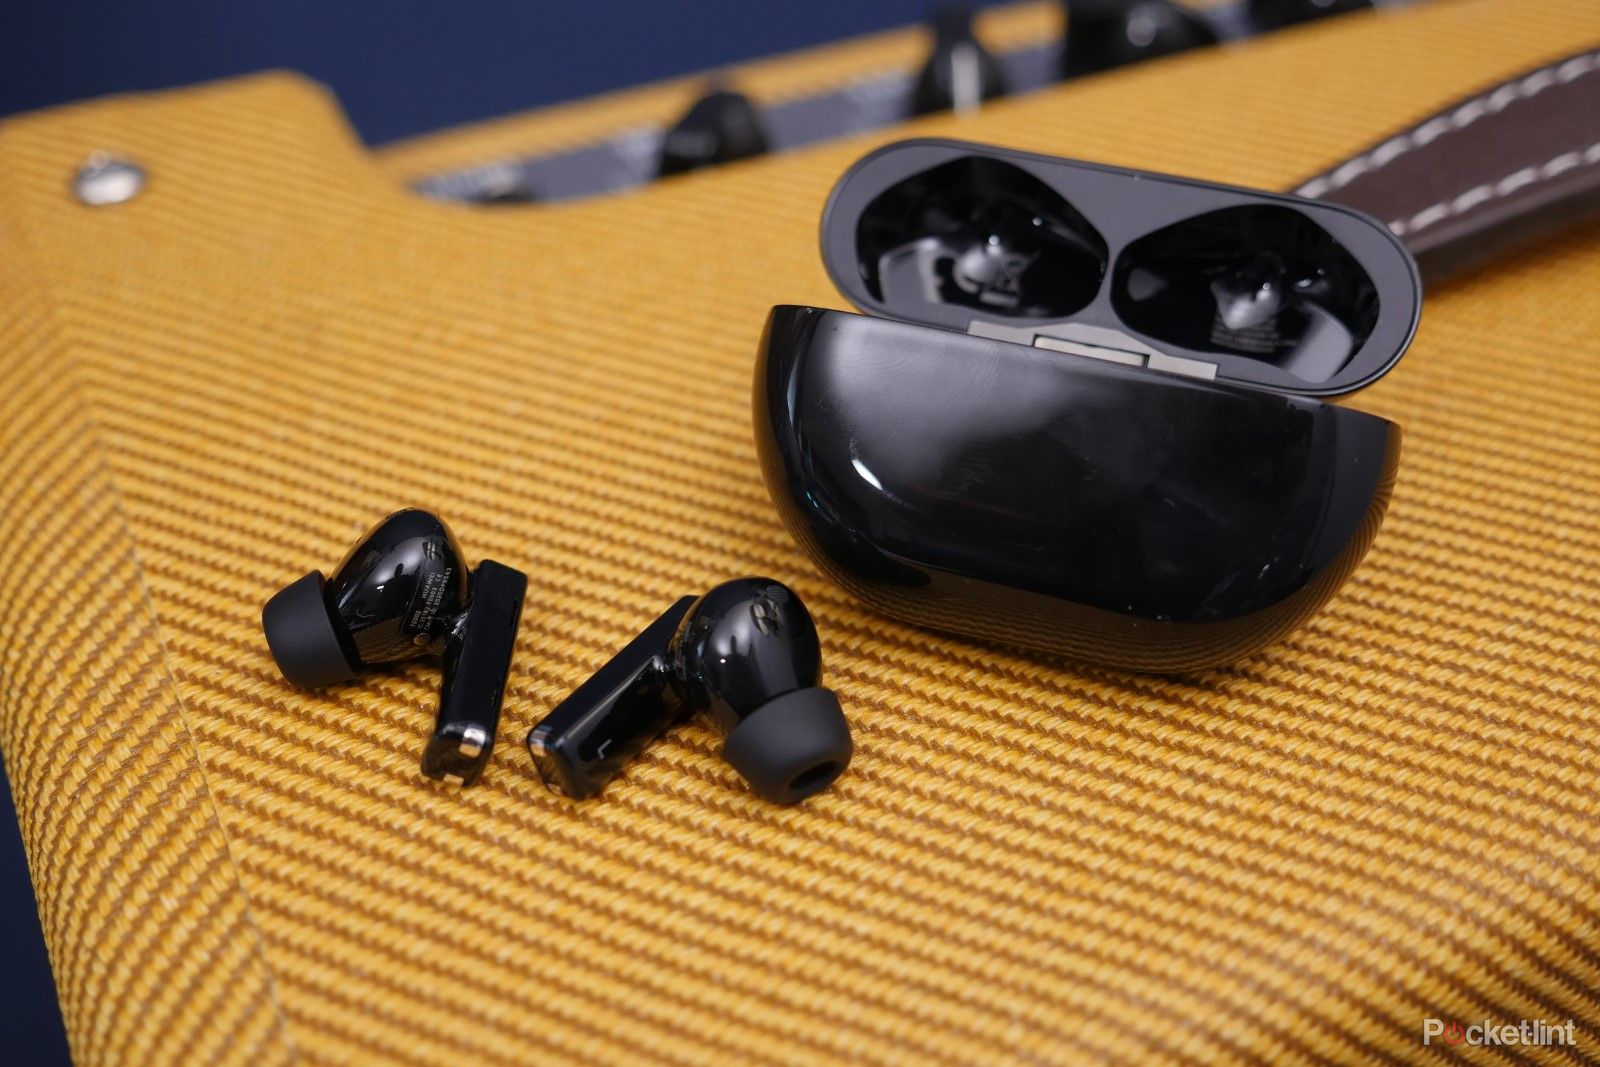 Huawei Freebuds Pro initial review: Convenient ANC true wireless earbuds photo 3